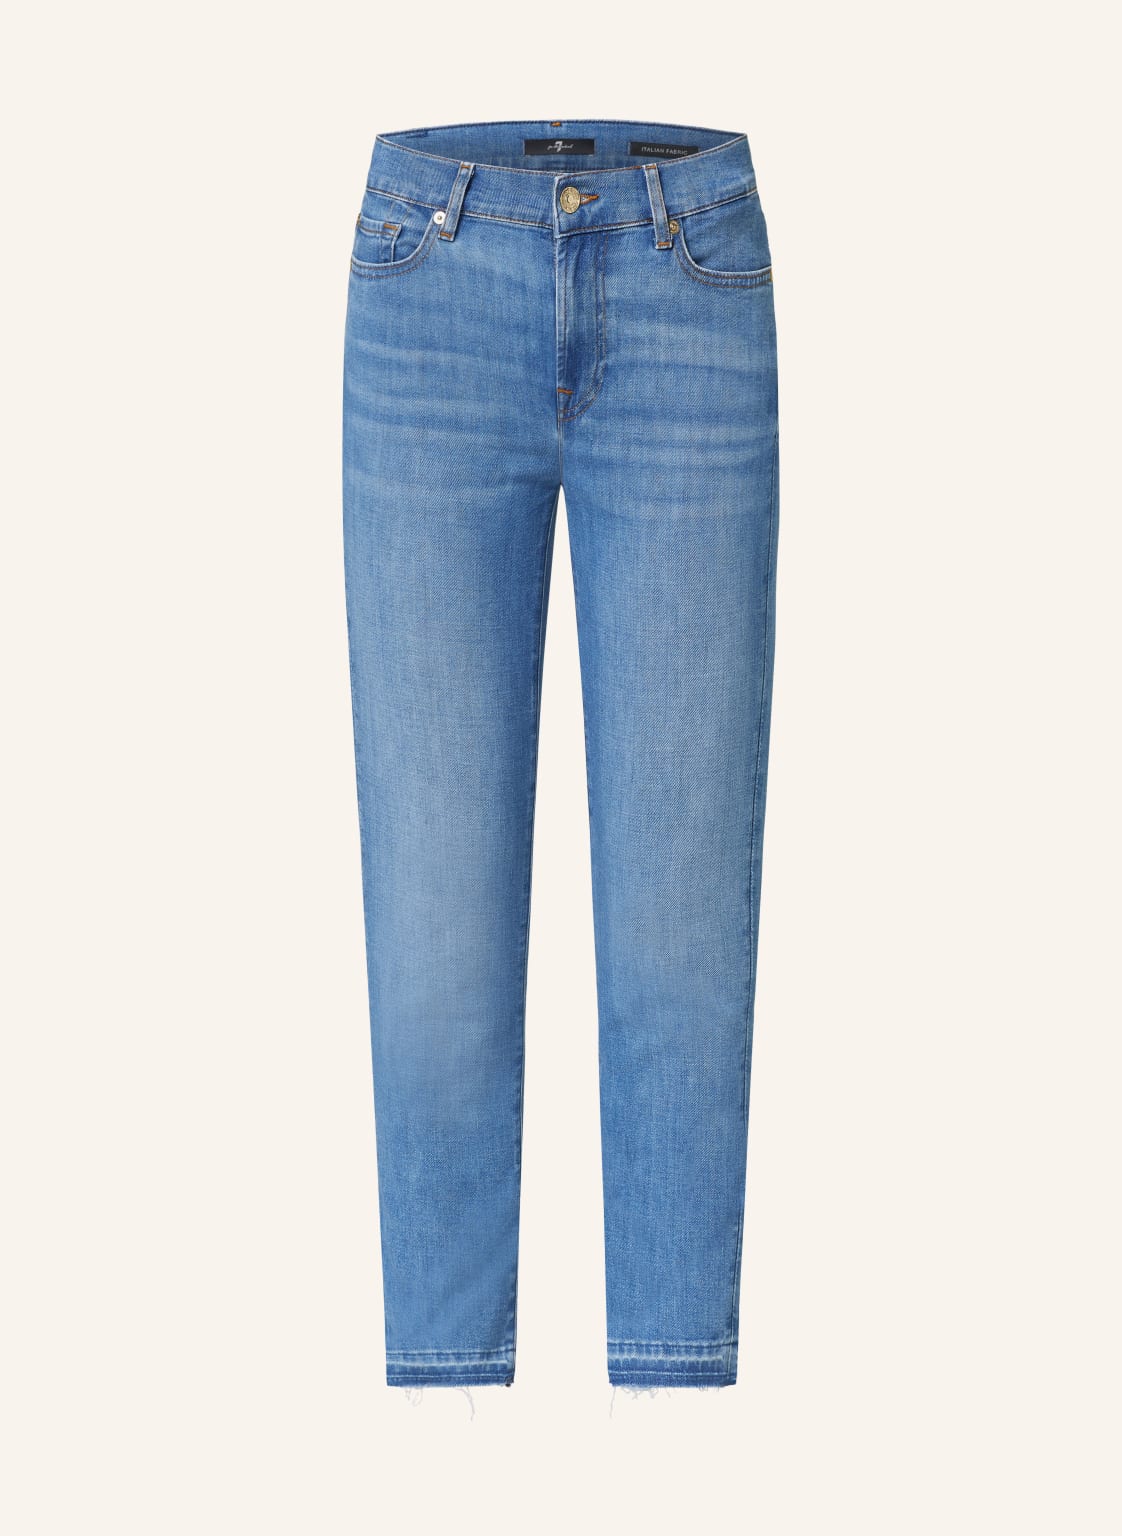 7 For All Mankind 7/8-Jeans Roxanne weiss von 7 For All Mankind